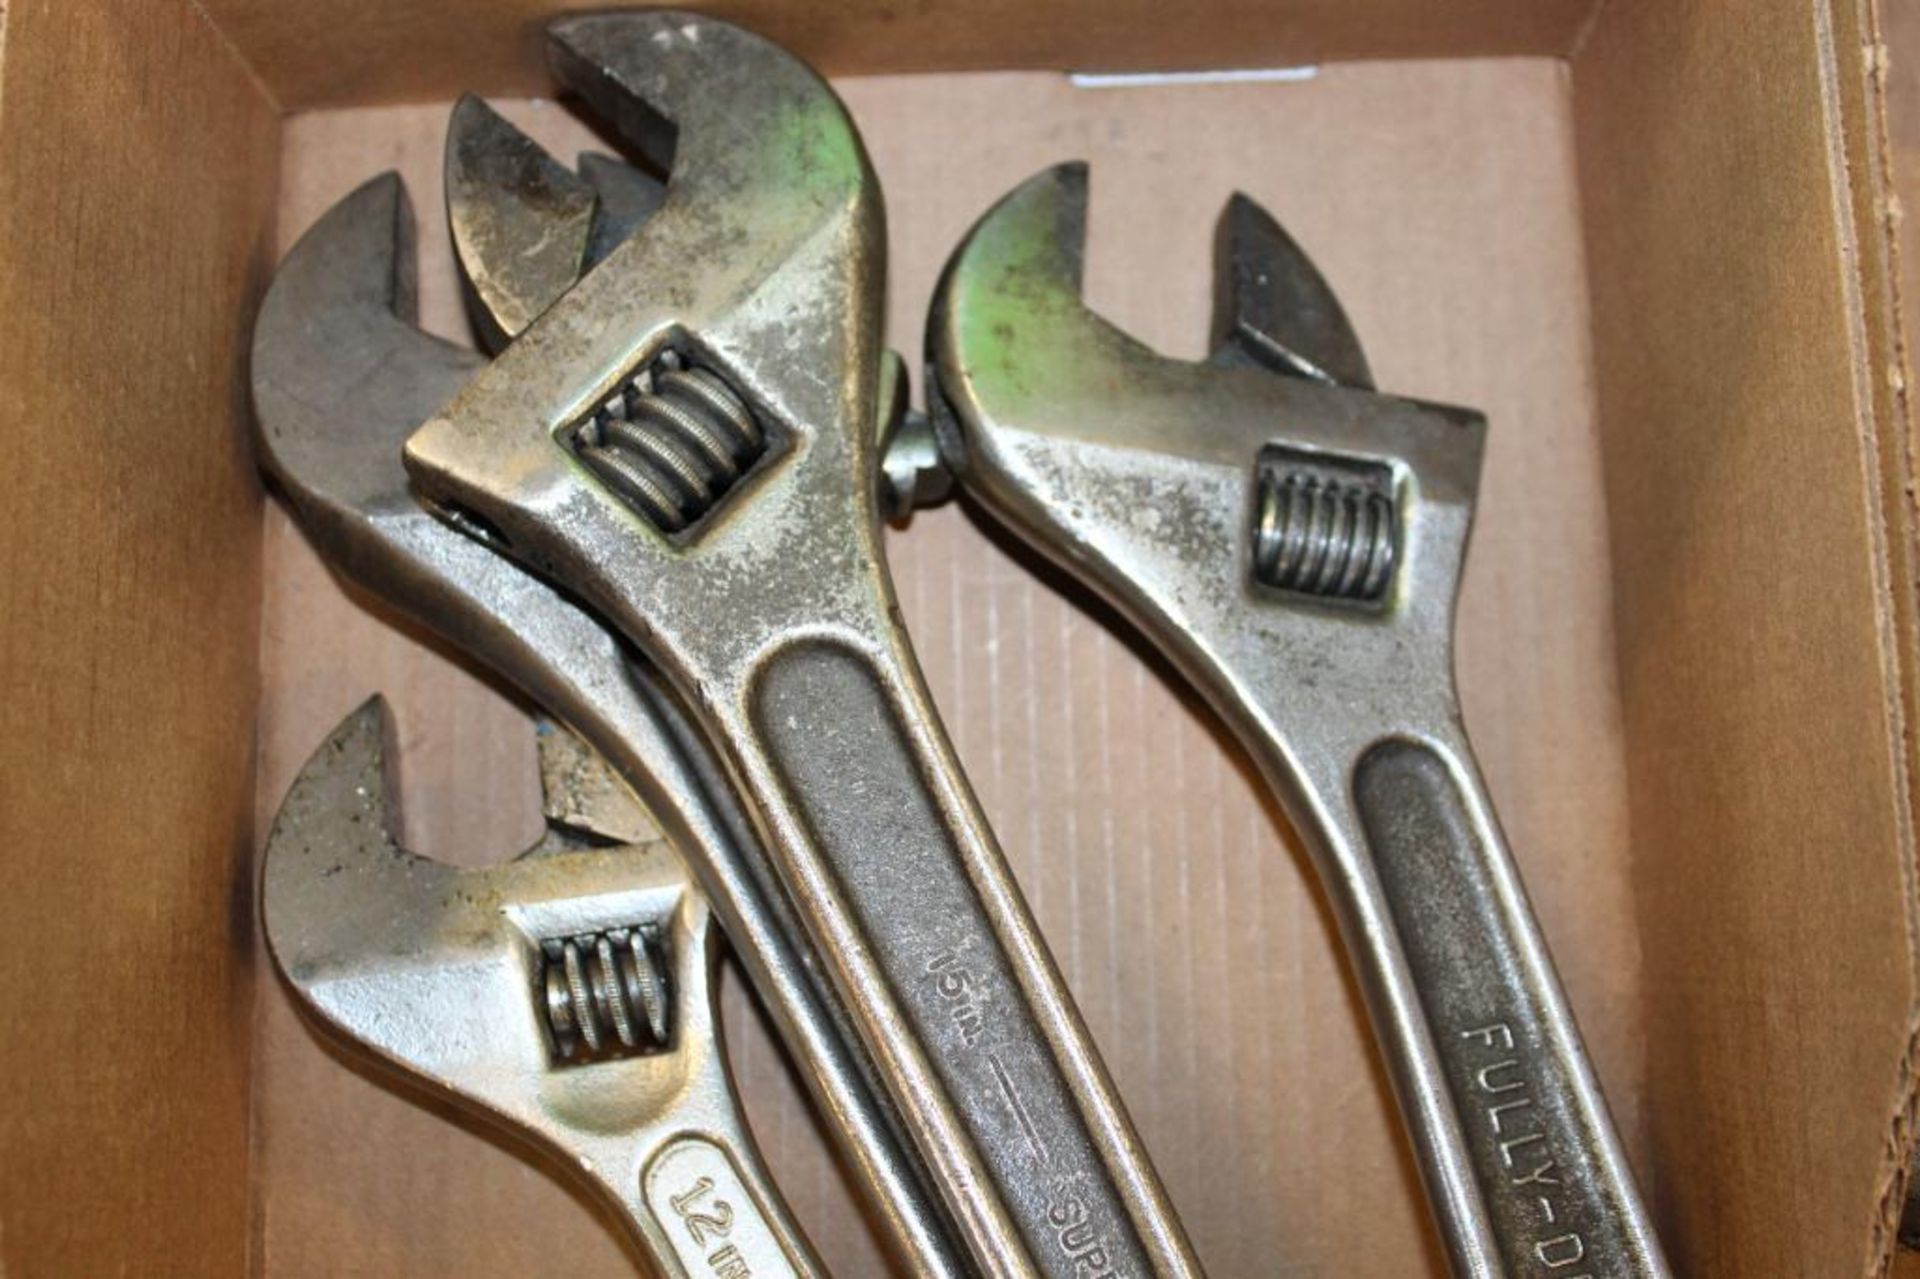 Lot of 4 Adjustable Wrenches - Sizes 12", 15", 18" - Image 2 of 2